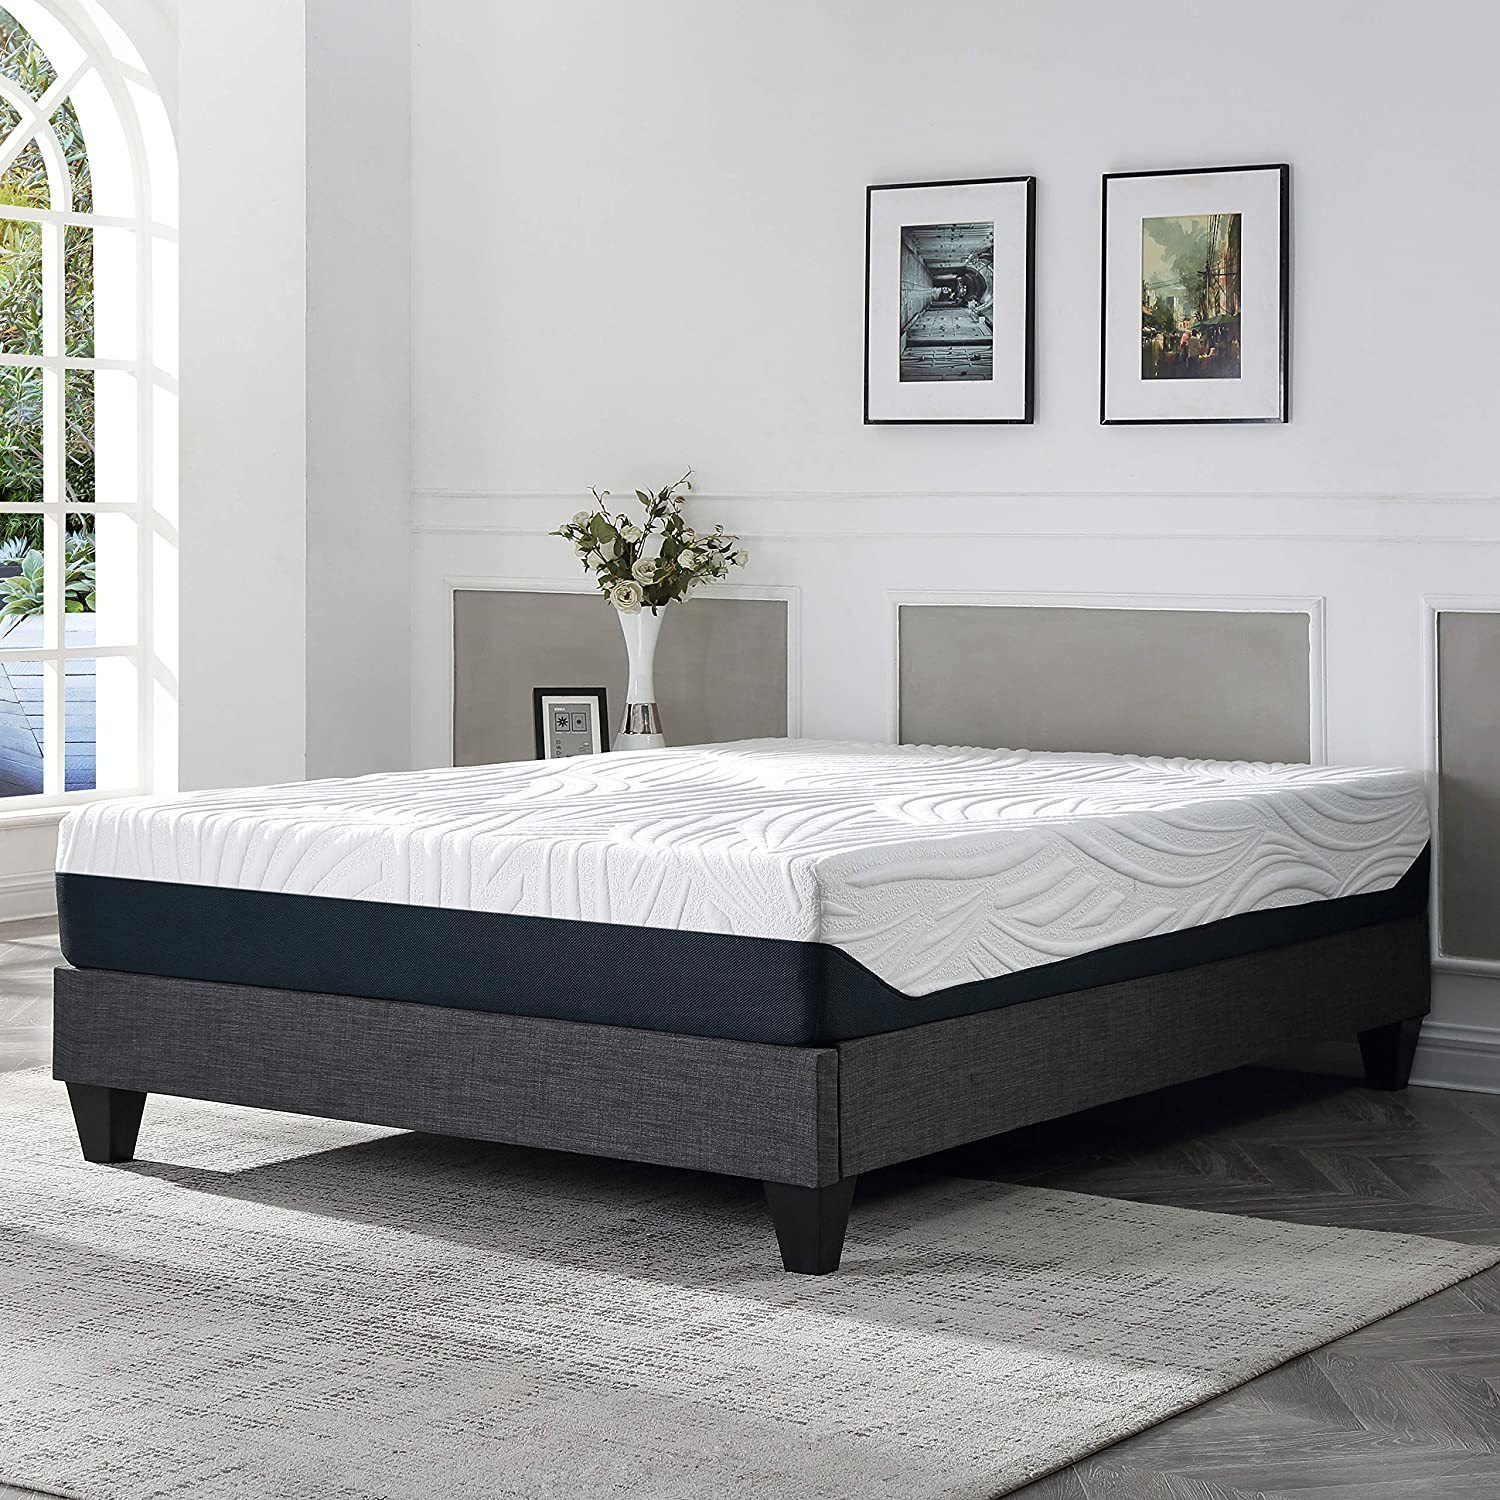 Primary image for Christies Home Living Acbed Platform Bed, Full, Gray